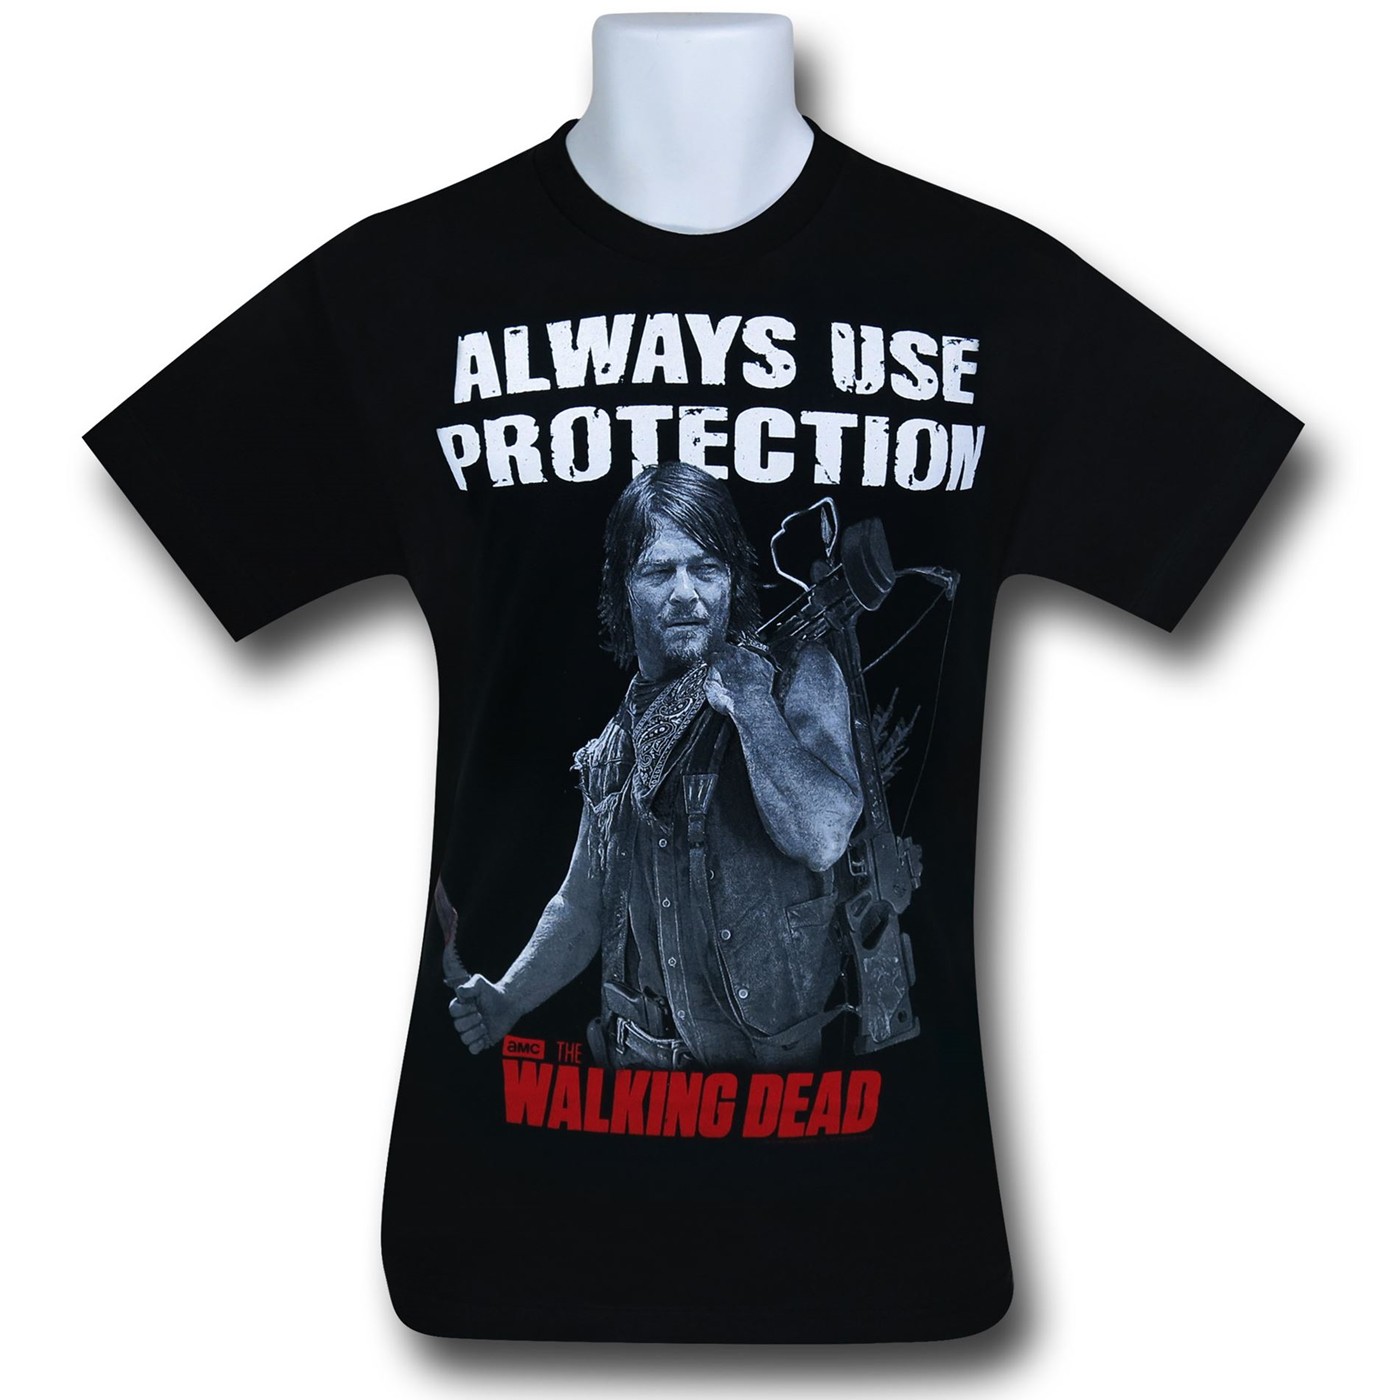 Walking Dead Use Protection T-Shirt